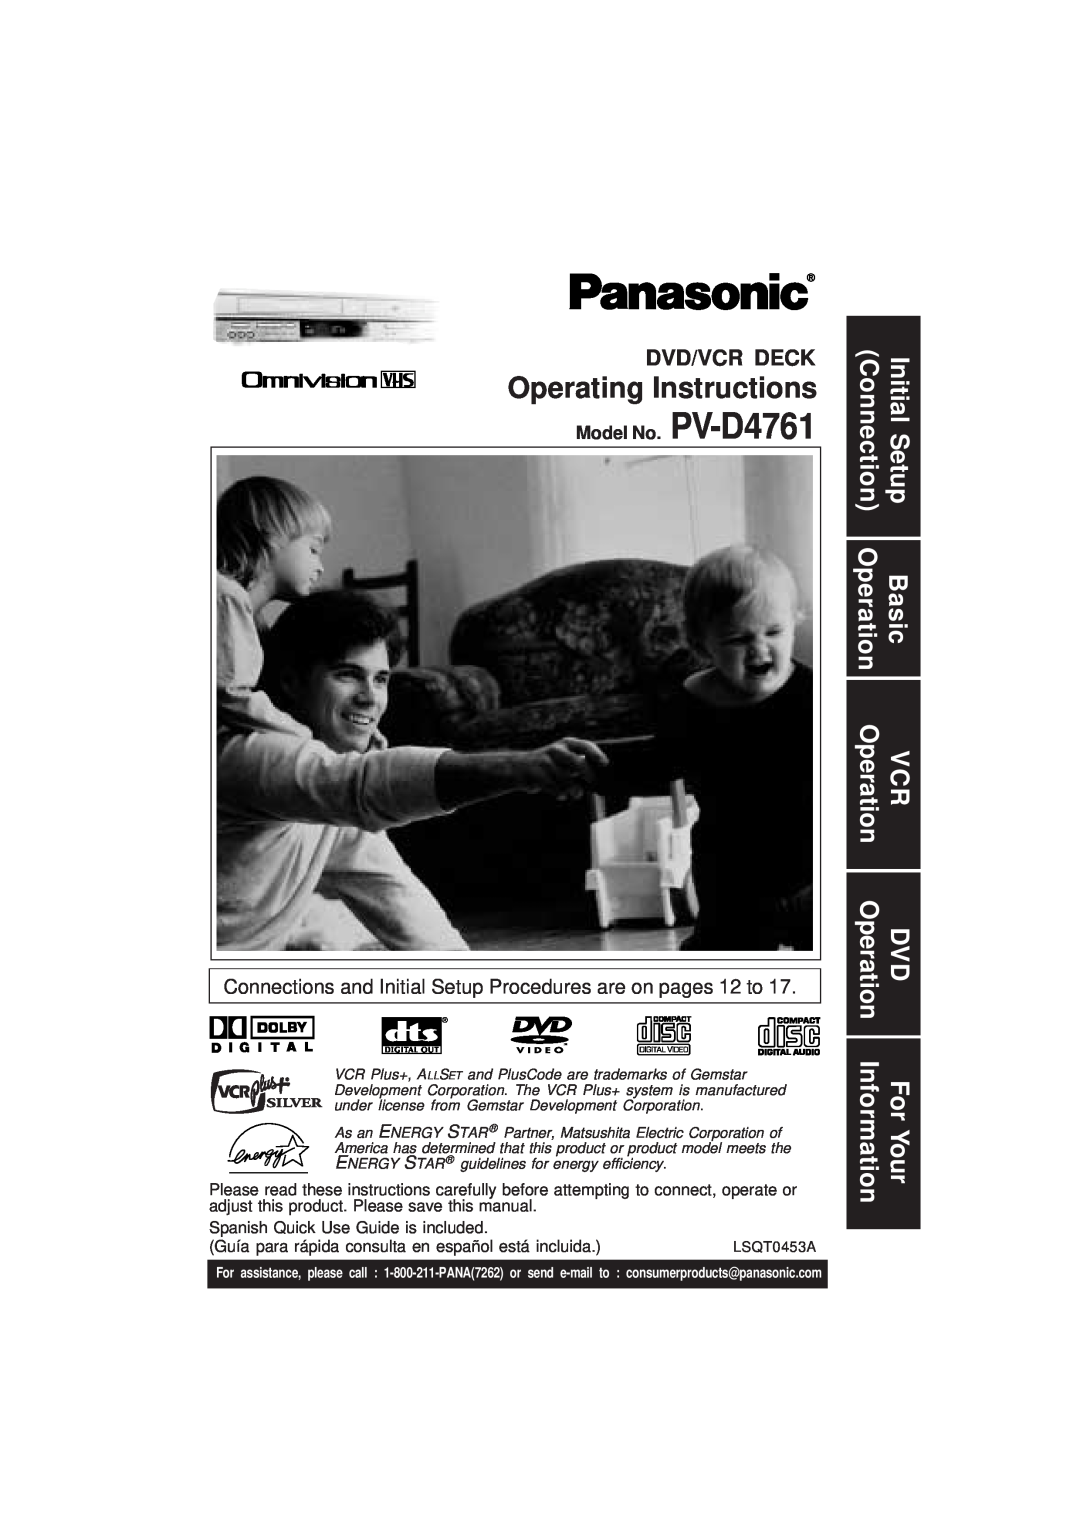 Panasonic PV-D4761 operating instructions Initial Setup, Basic, For Your, Connection, Operation, Information 